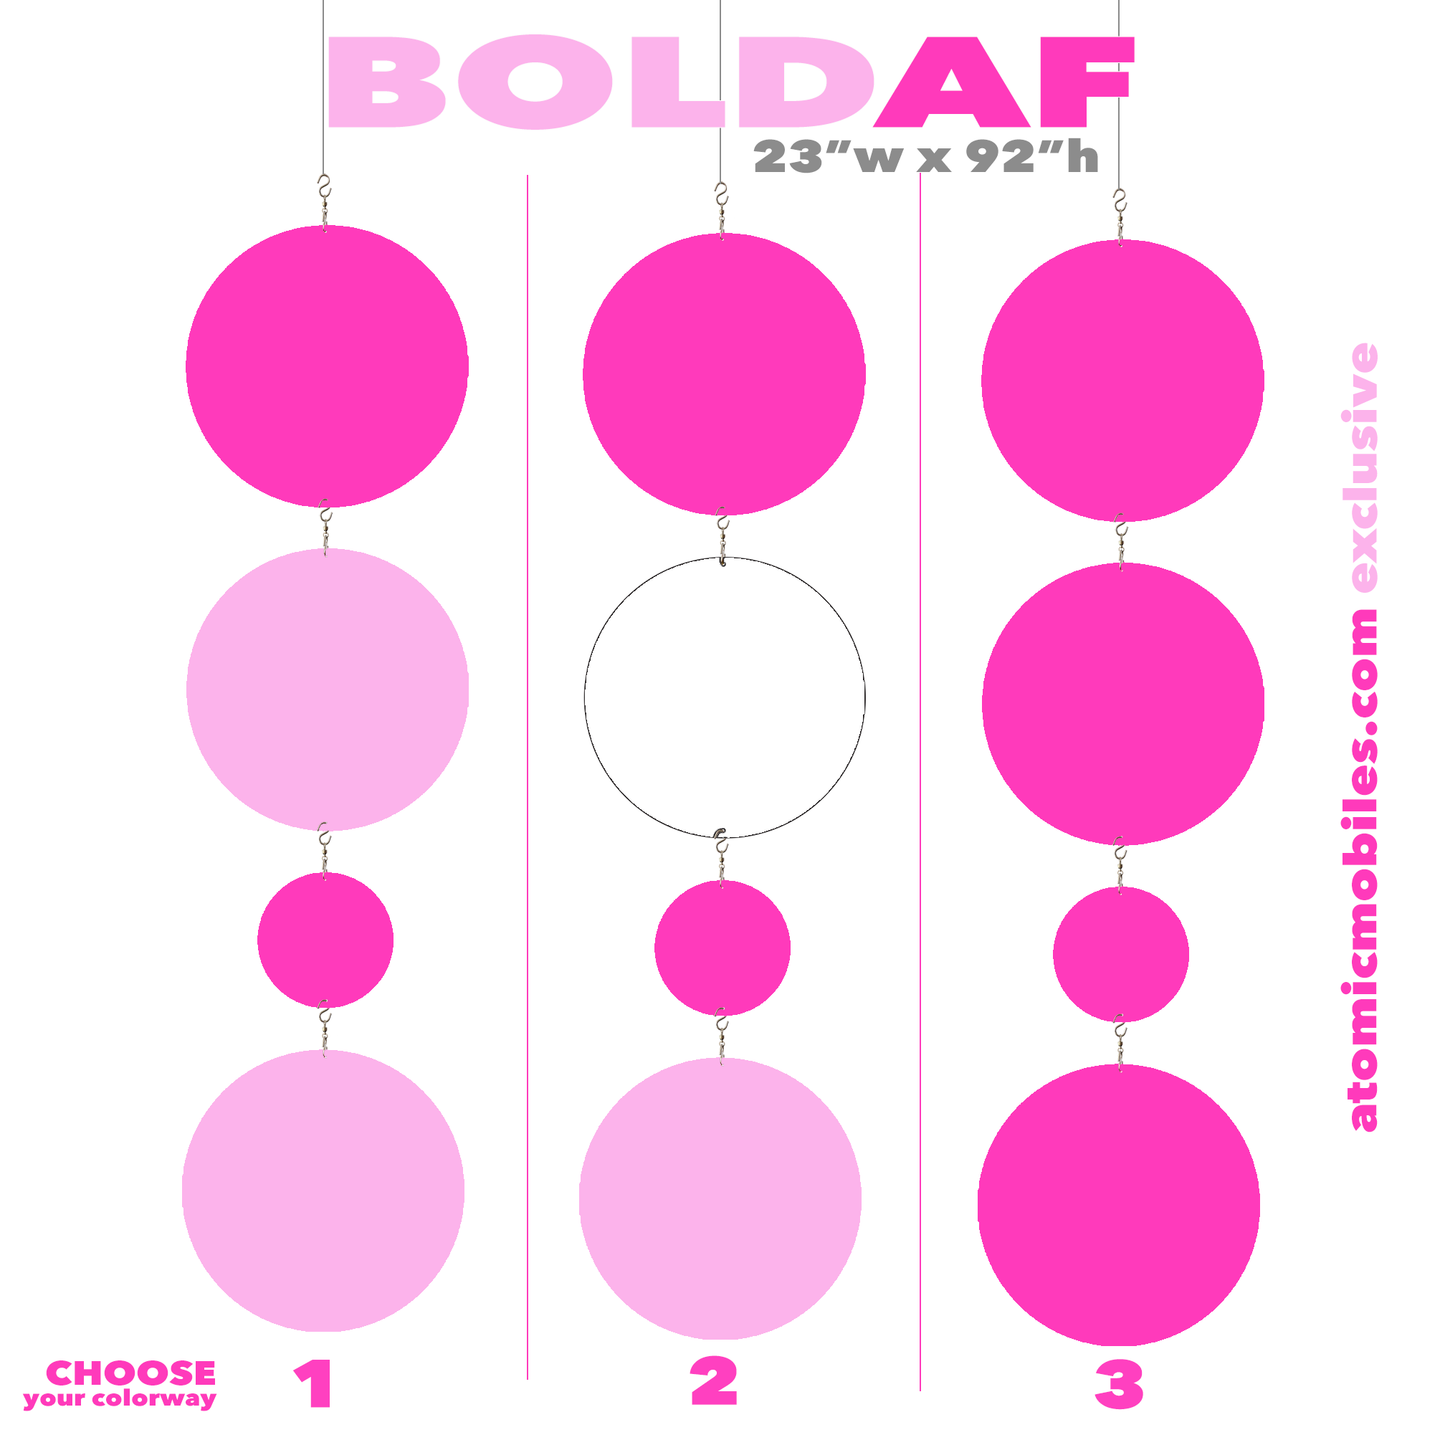 BOLD AF in Barbie Dream House Pink - bigger than life XXL dramatic vertical hanging art mobiles - 23w x 92h - in 3 different Pink colorways - by AtomicMobiles.com